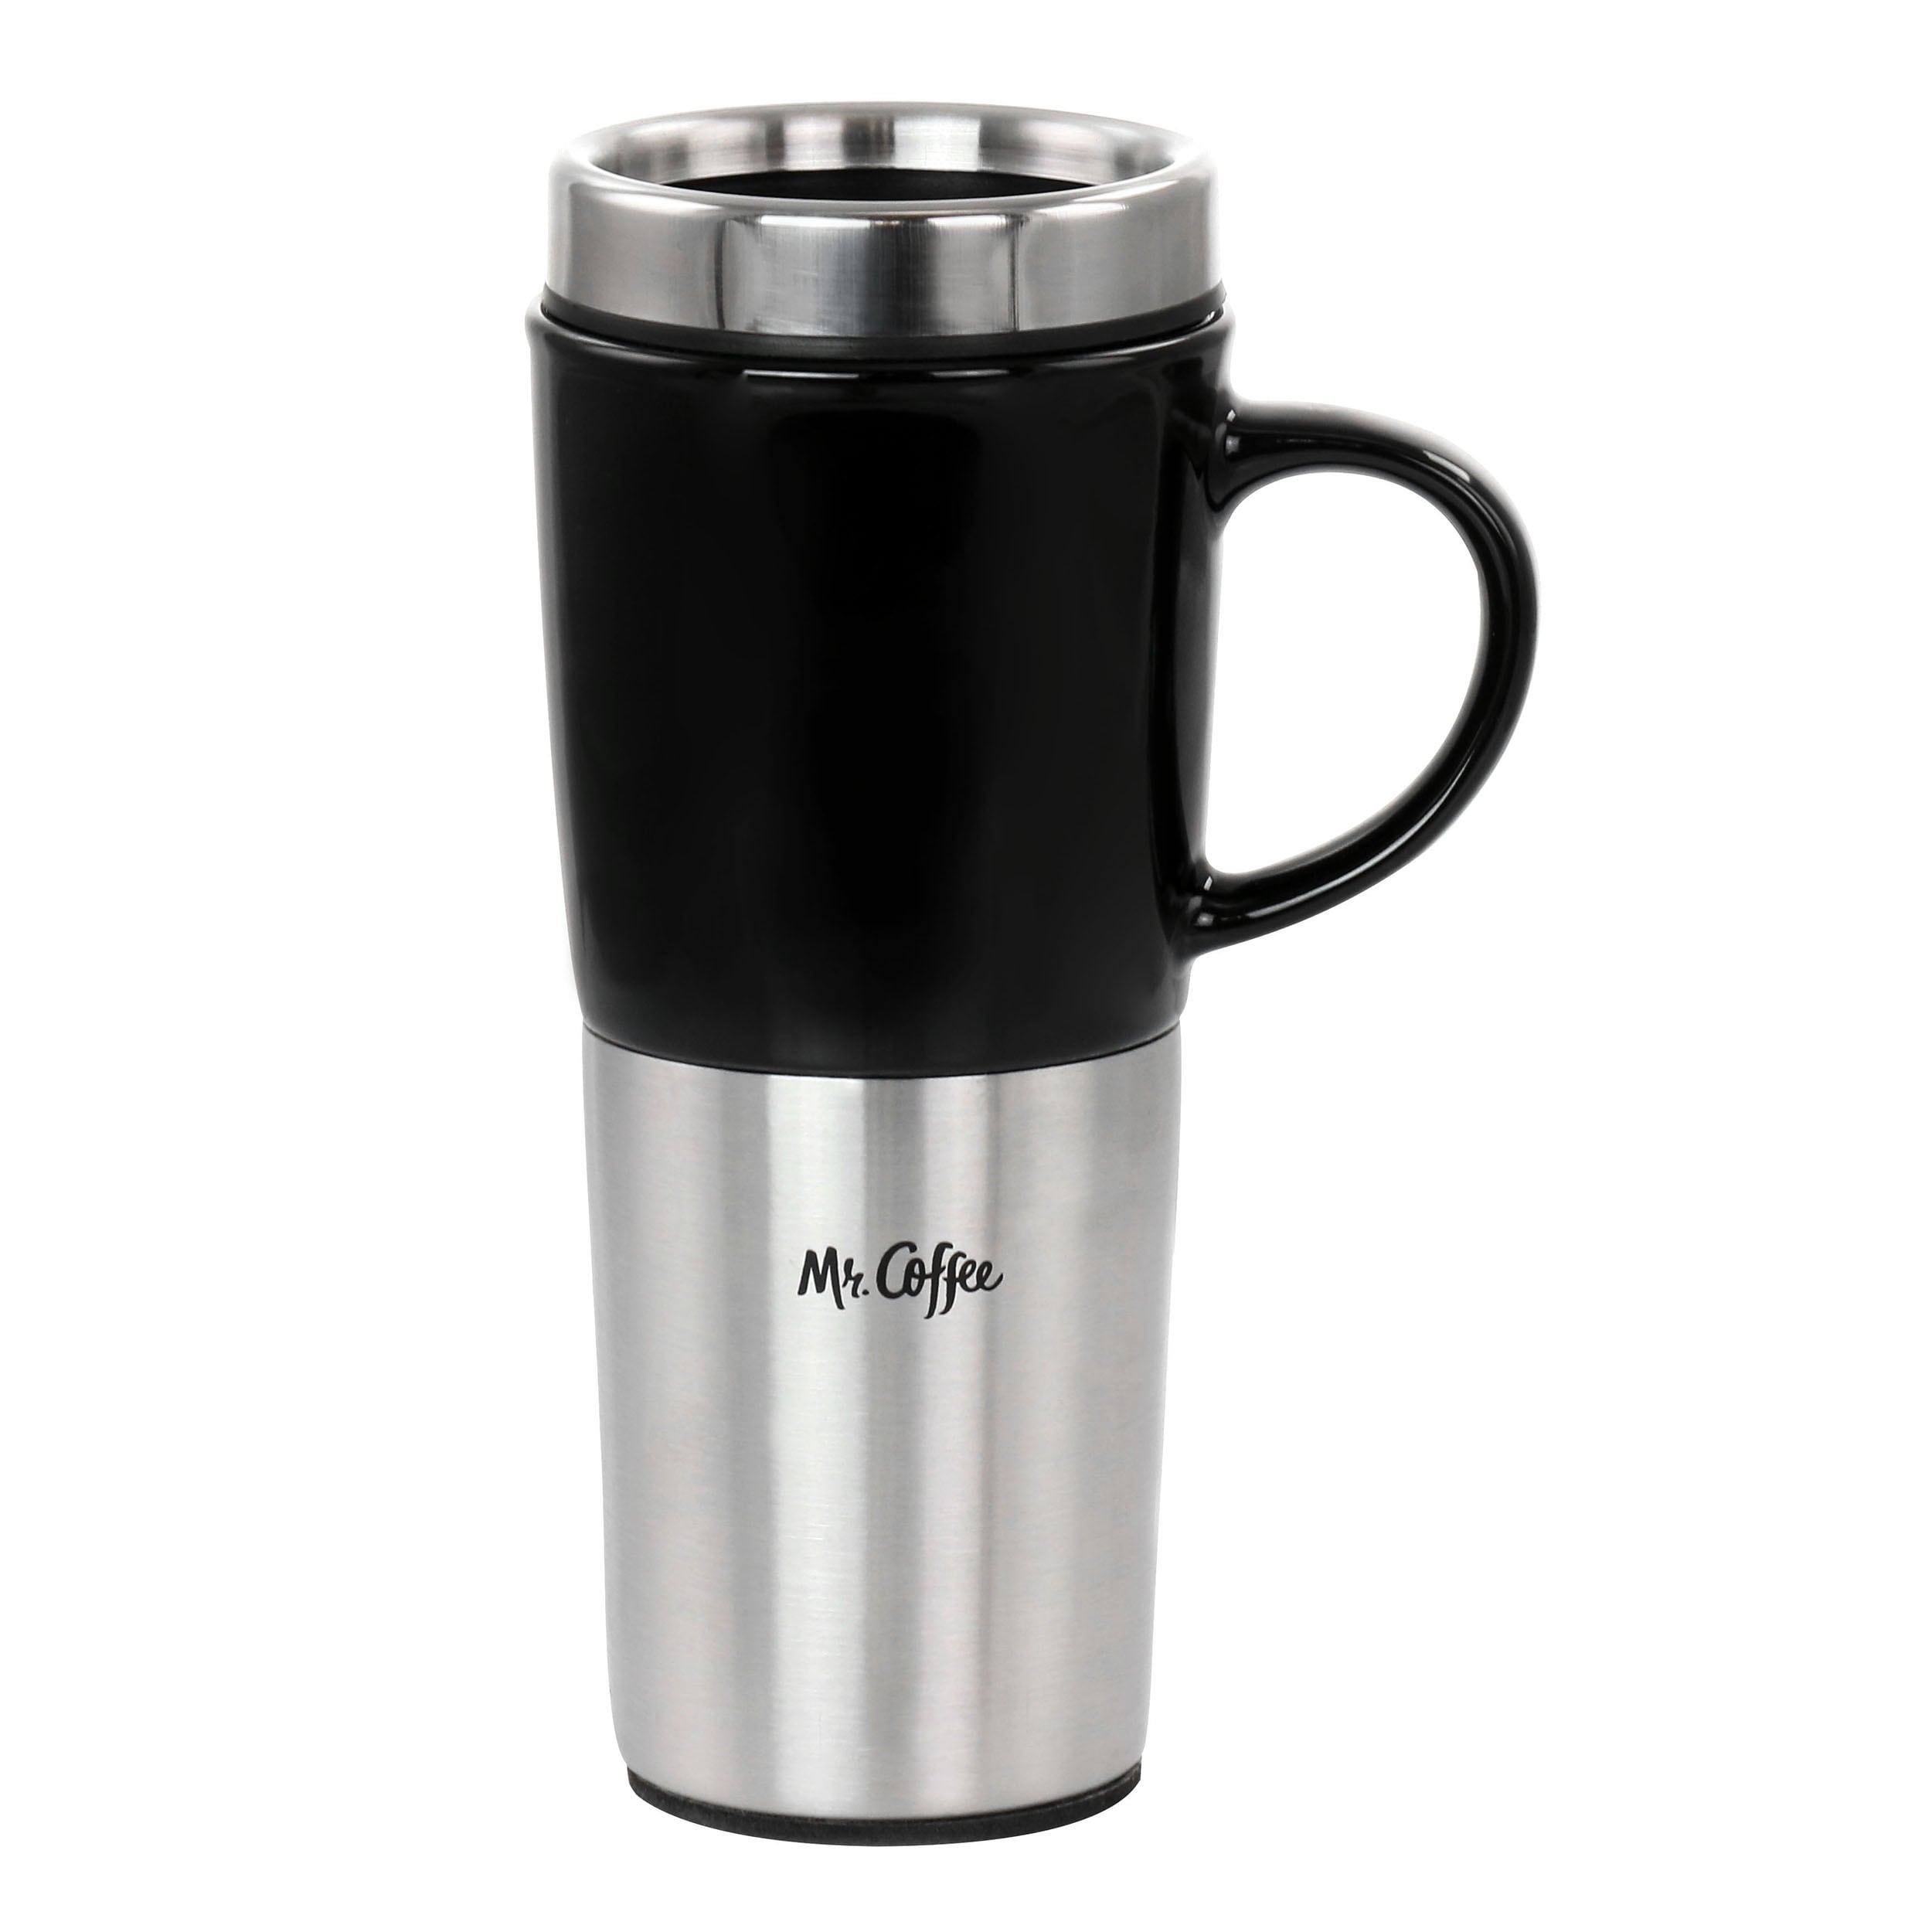 https://ak1.ostkcdn.com/images/products/is/images/direct/aa720660c641d2a3bee42edb1cffb54a6e8a6f86/Mr.-Coffee-16oz-Stainless-Steel-and-Stoneware-Travel-Mug.jpg